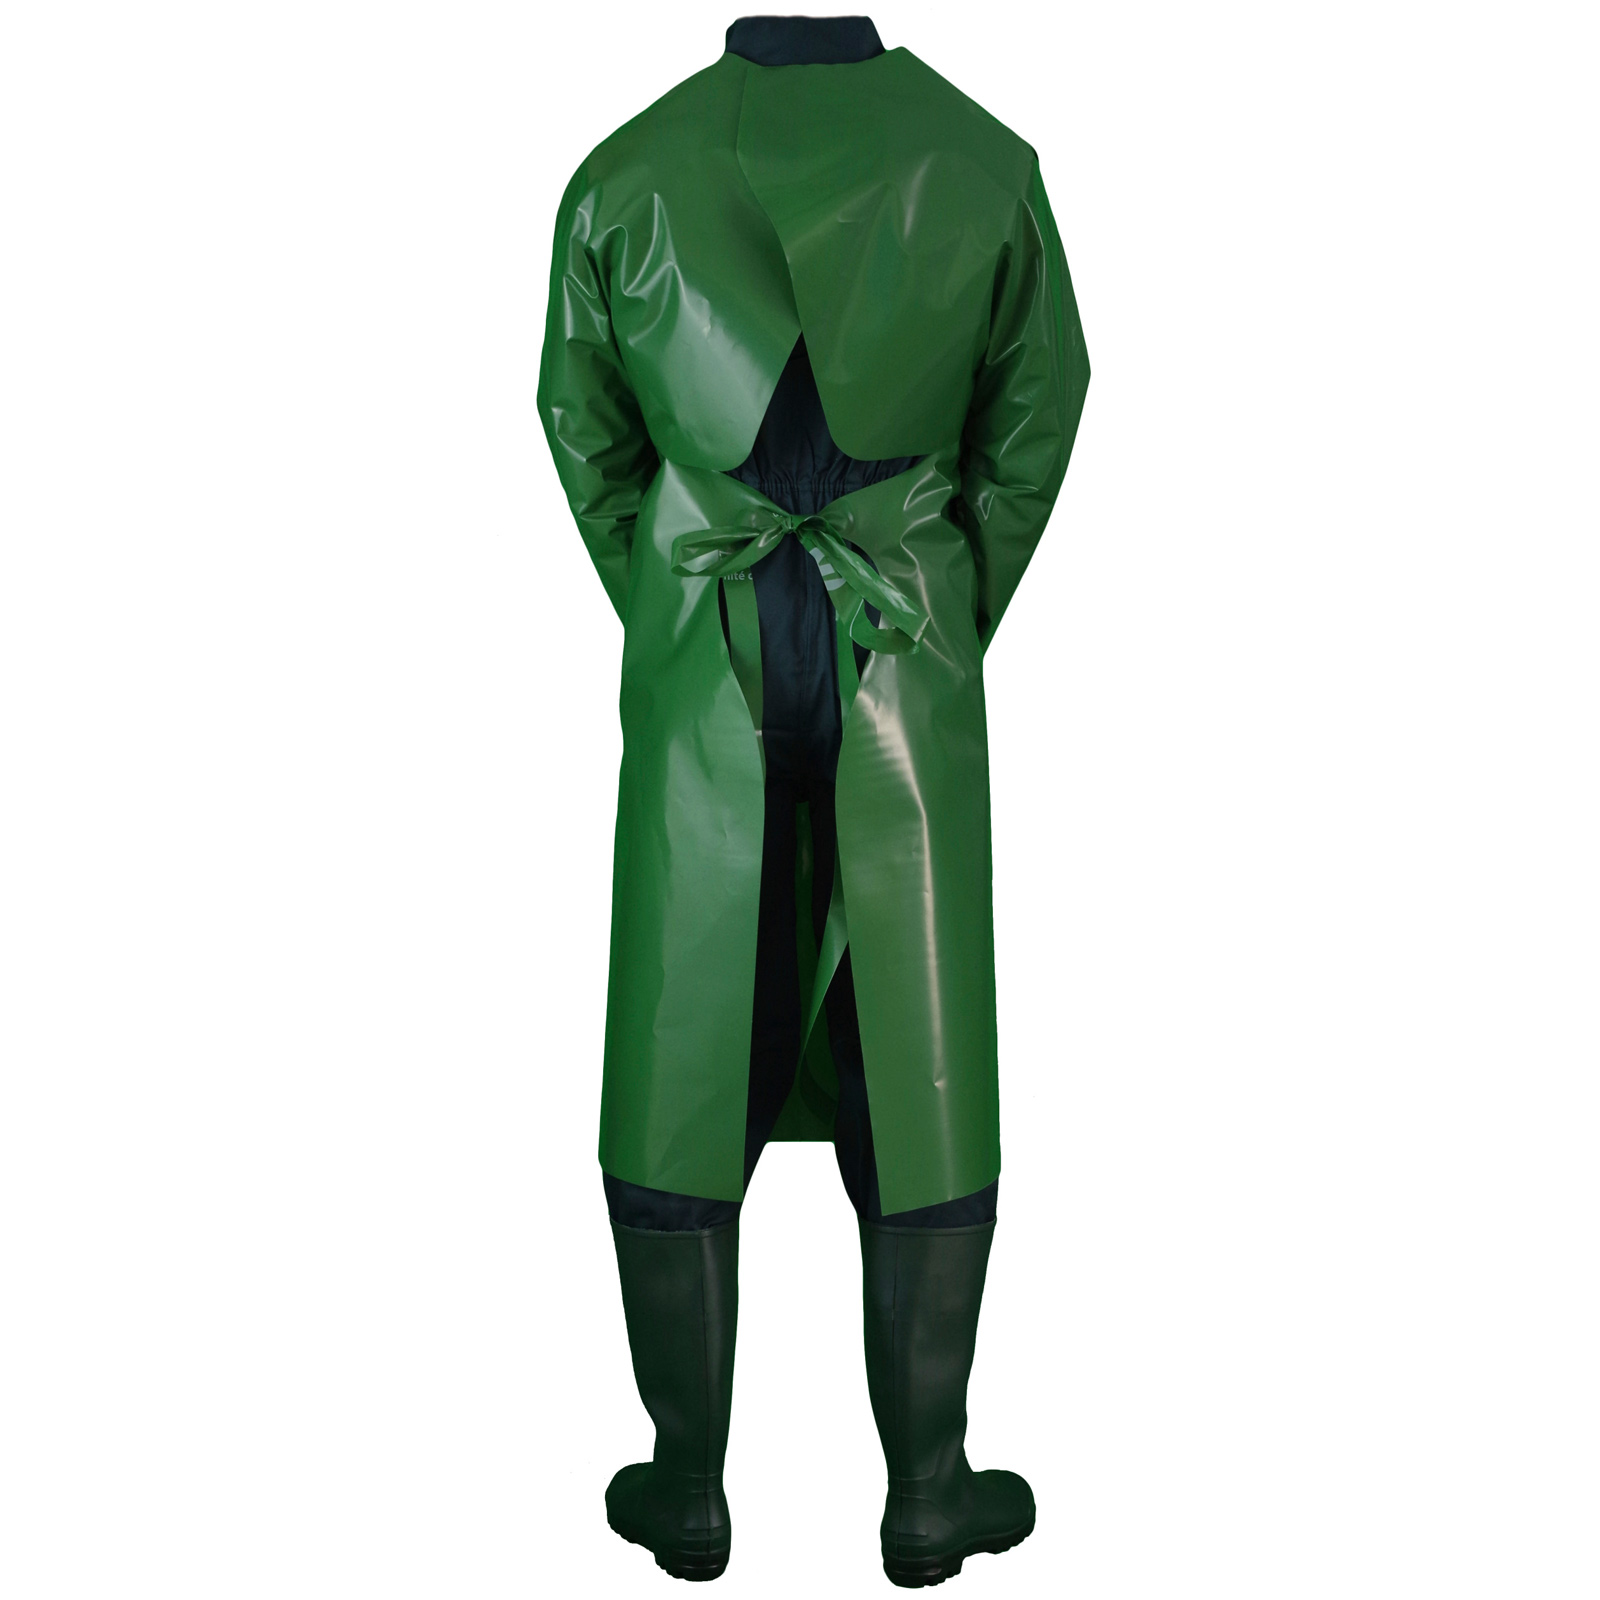 Plant Protection Sleeve Apron, green